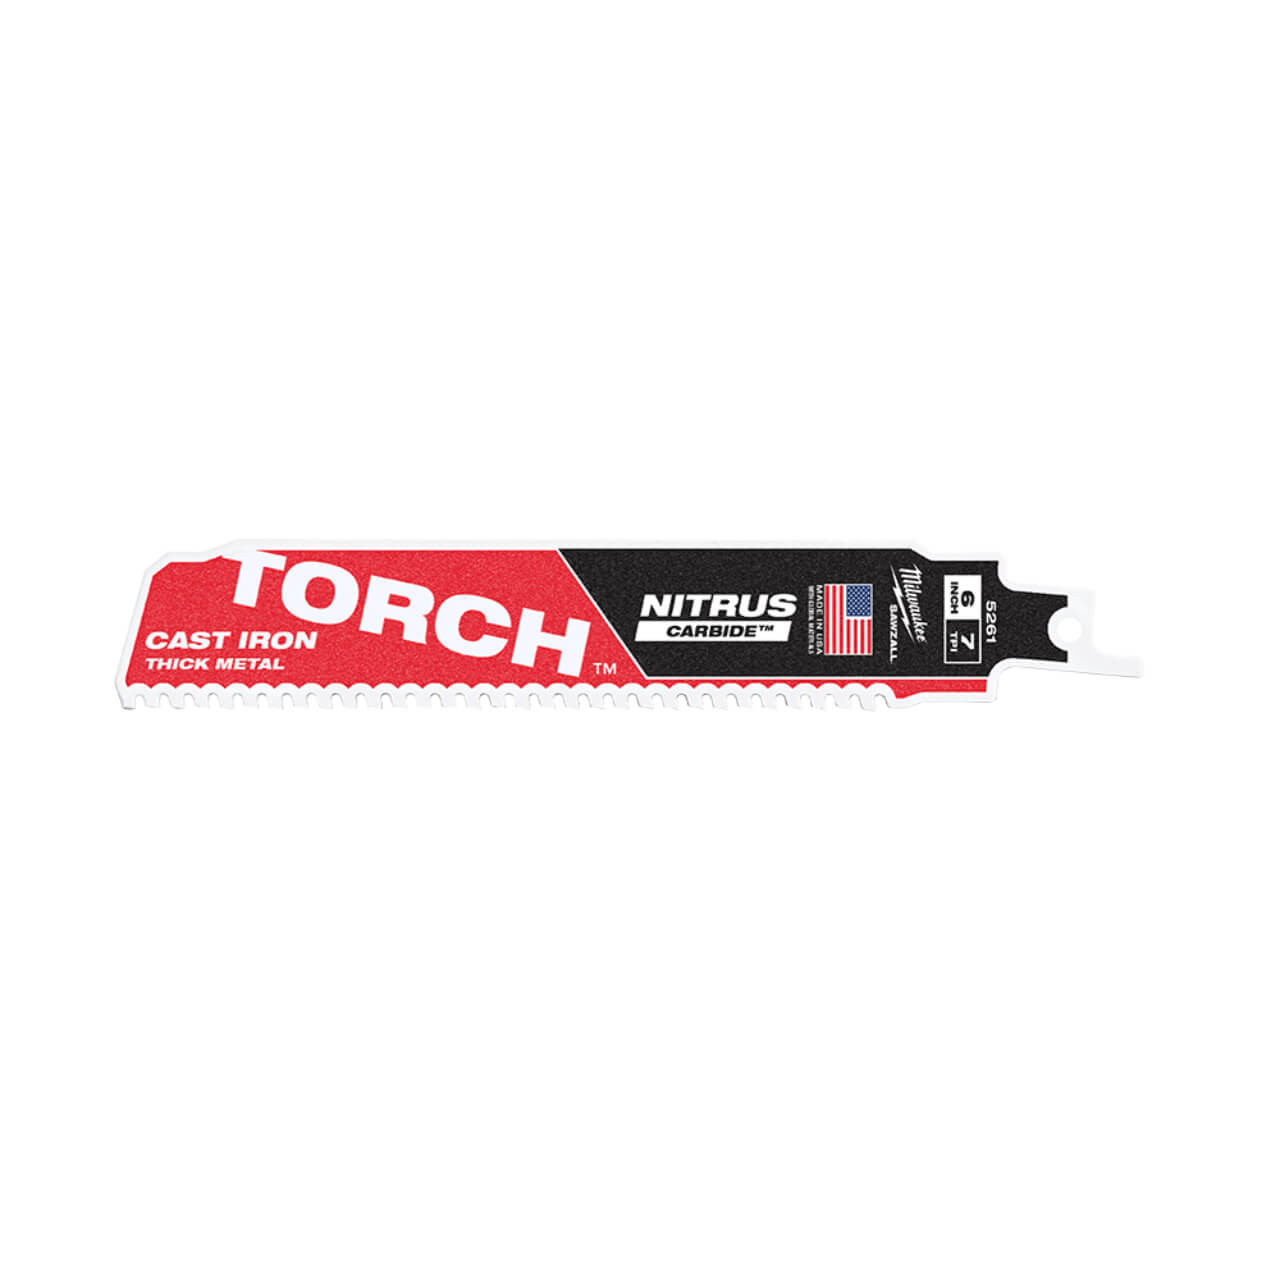 Milwaukee Sawzall 150mm 7tpi The Torch With Nitrus Carbide Reciprocating Saw Blade